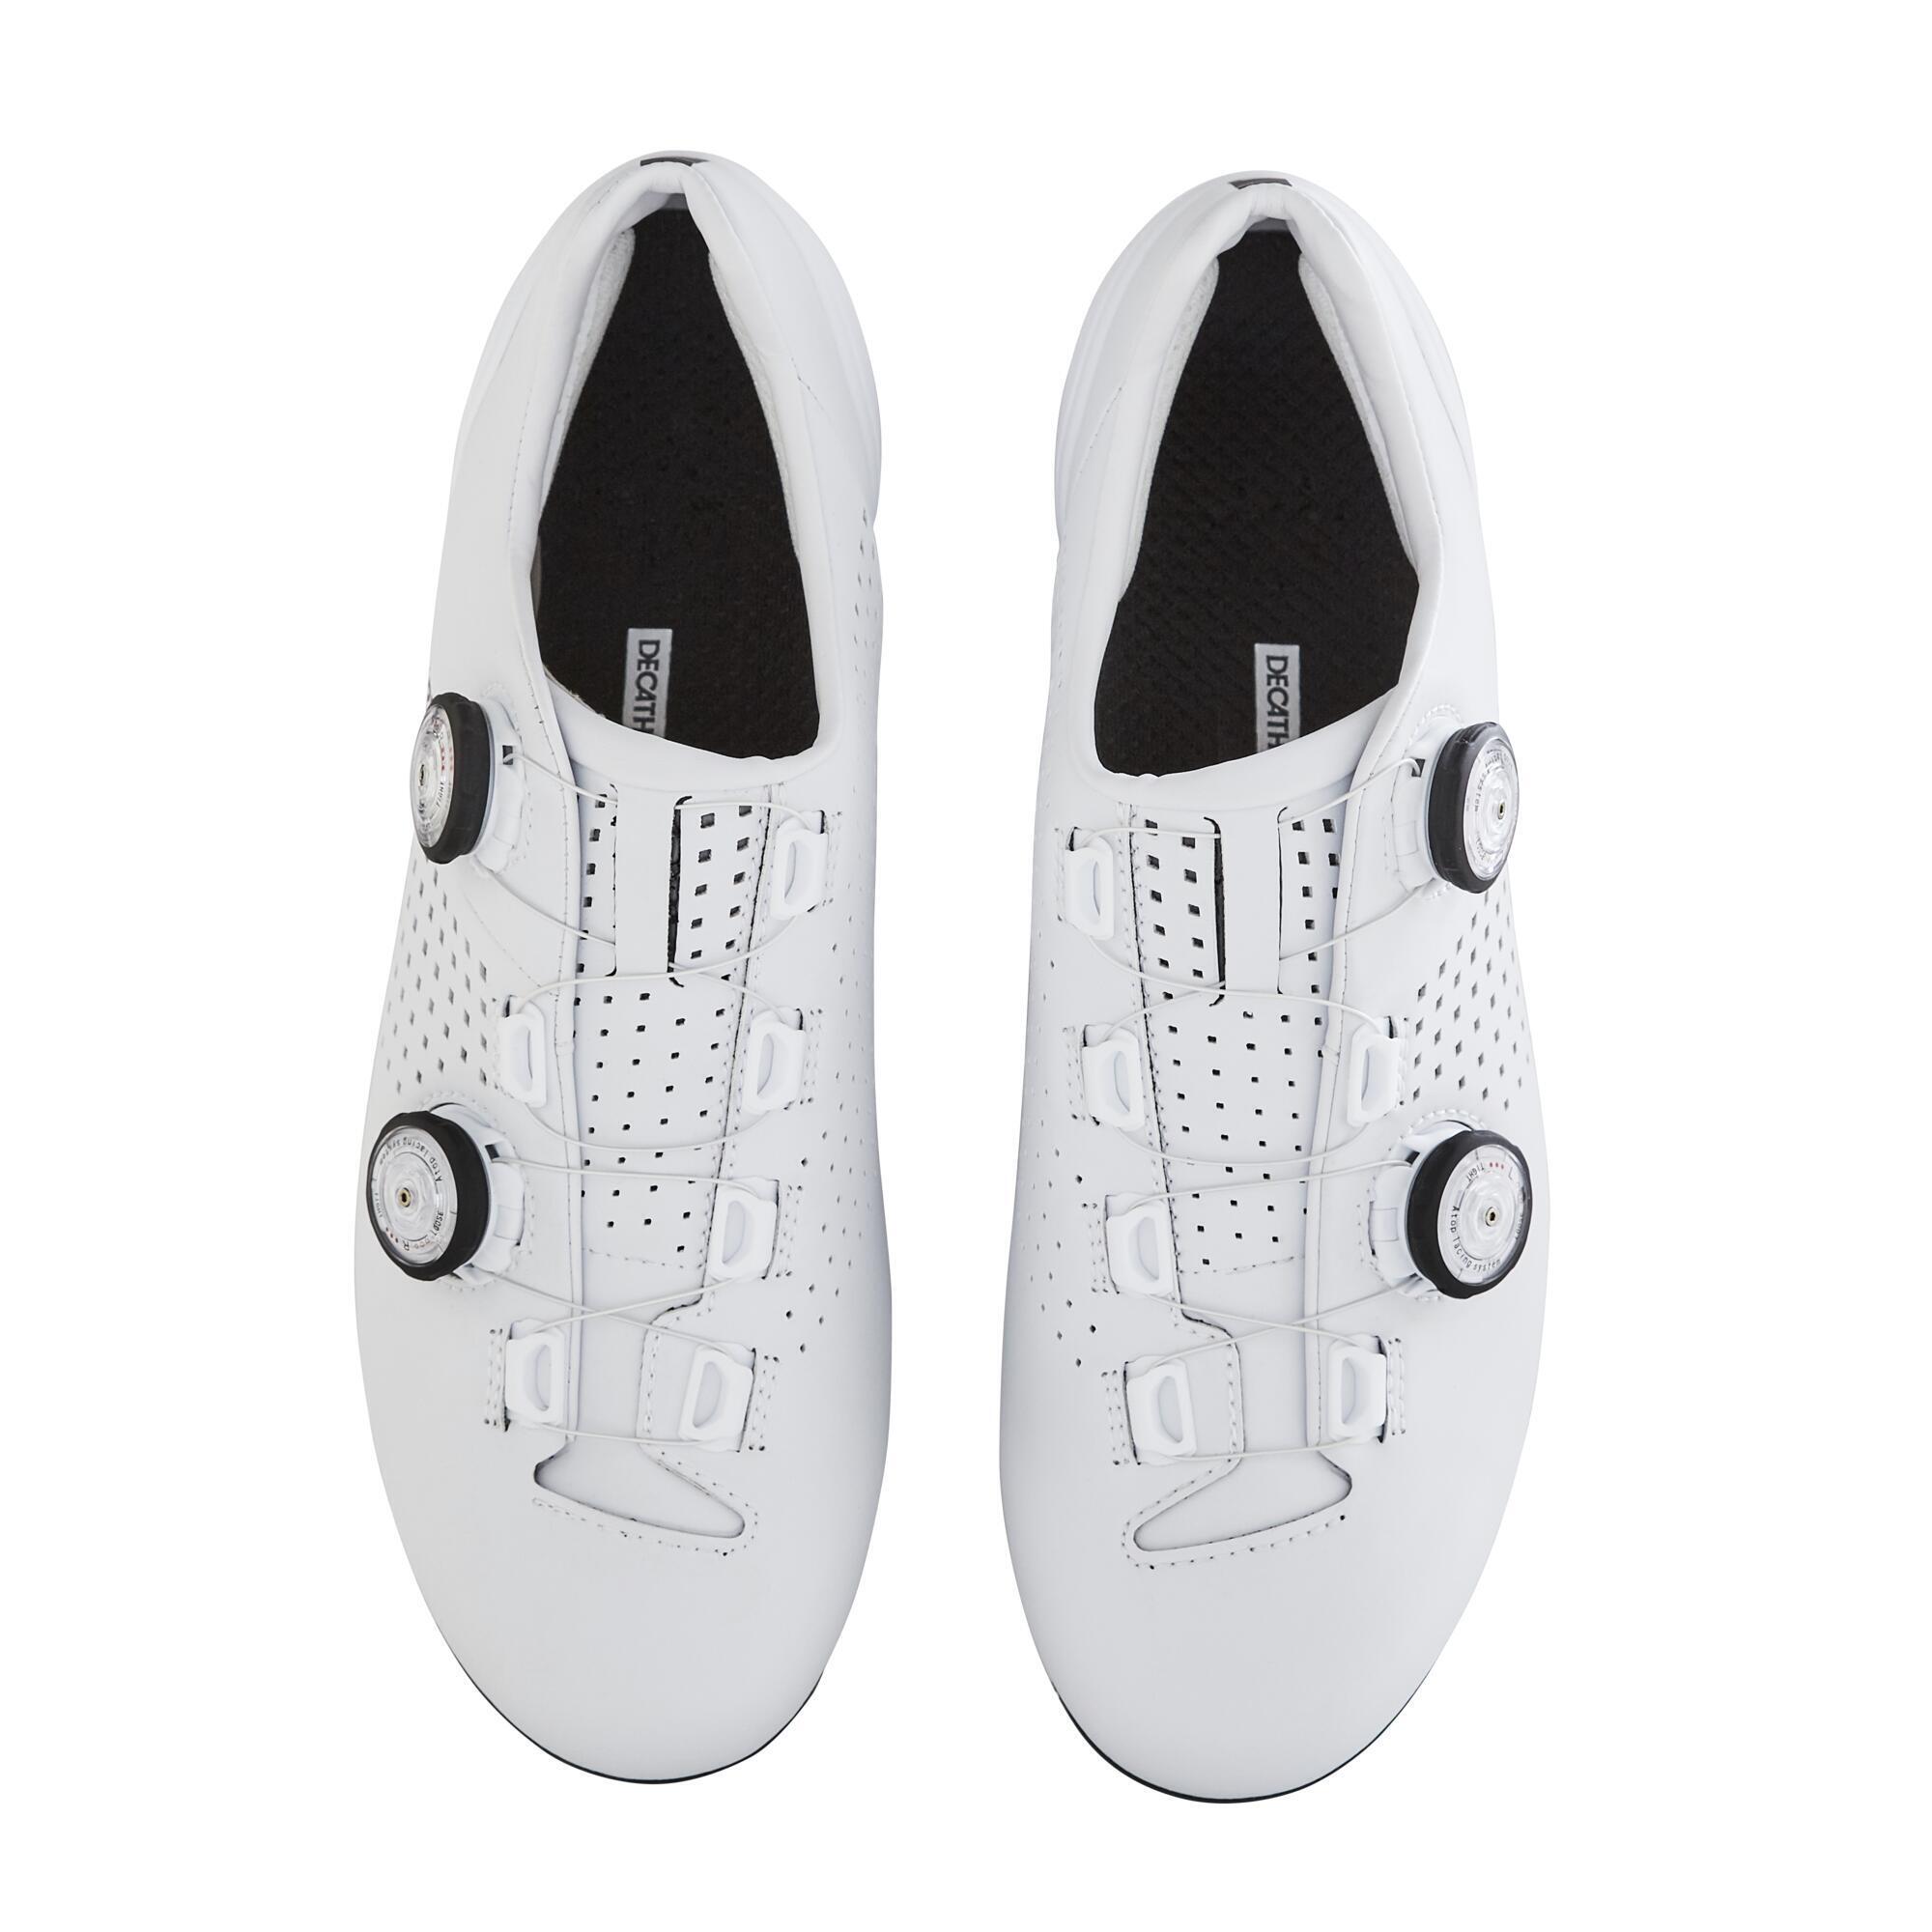 RoadR 900 Full Carbon Road Cycling Shoe - White 4/8